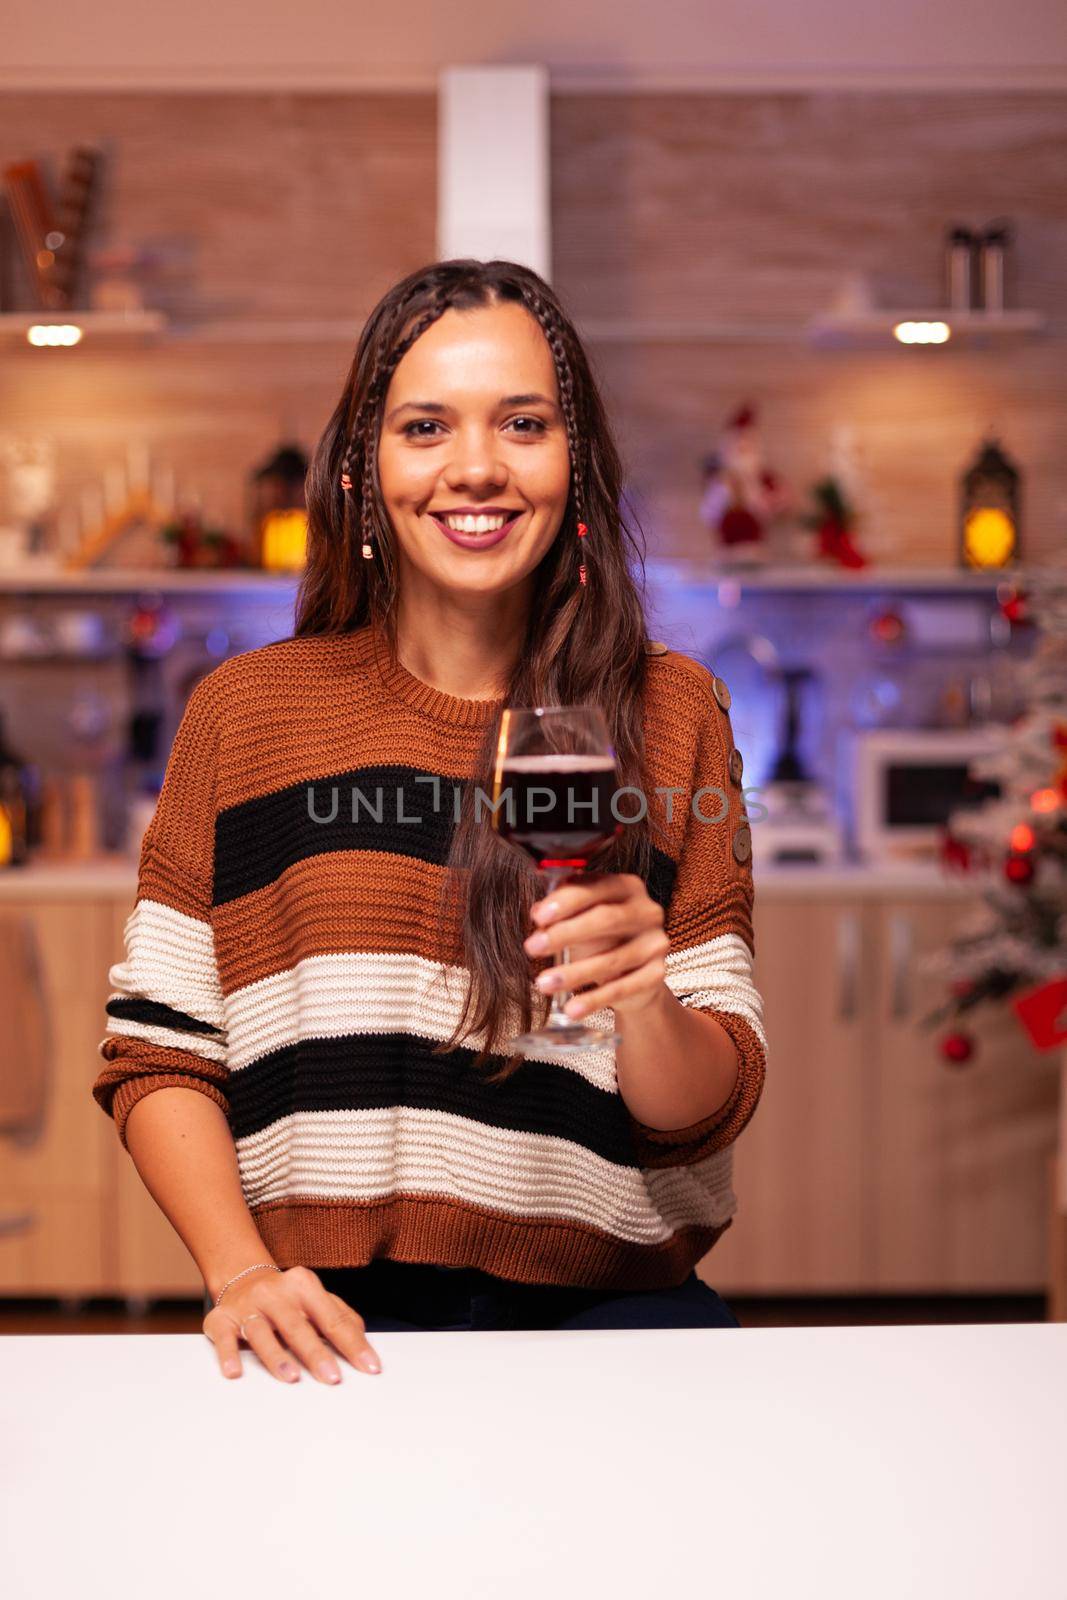 Portrait of cheerful woman holding glass of wine by DCStudio